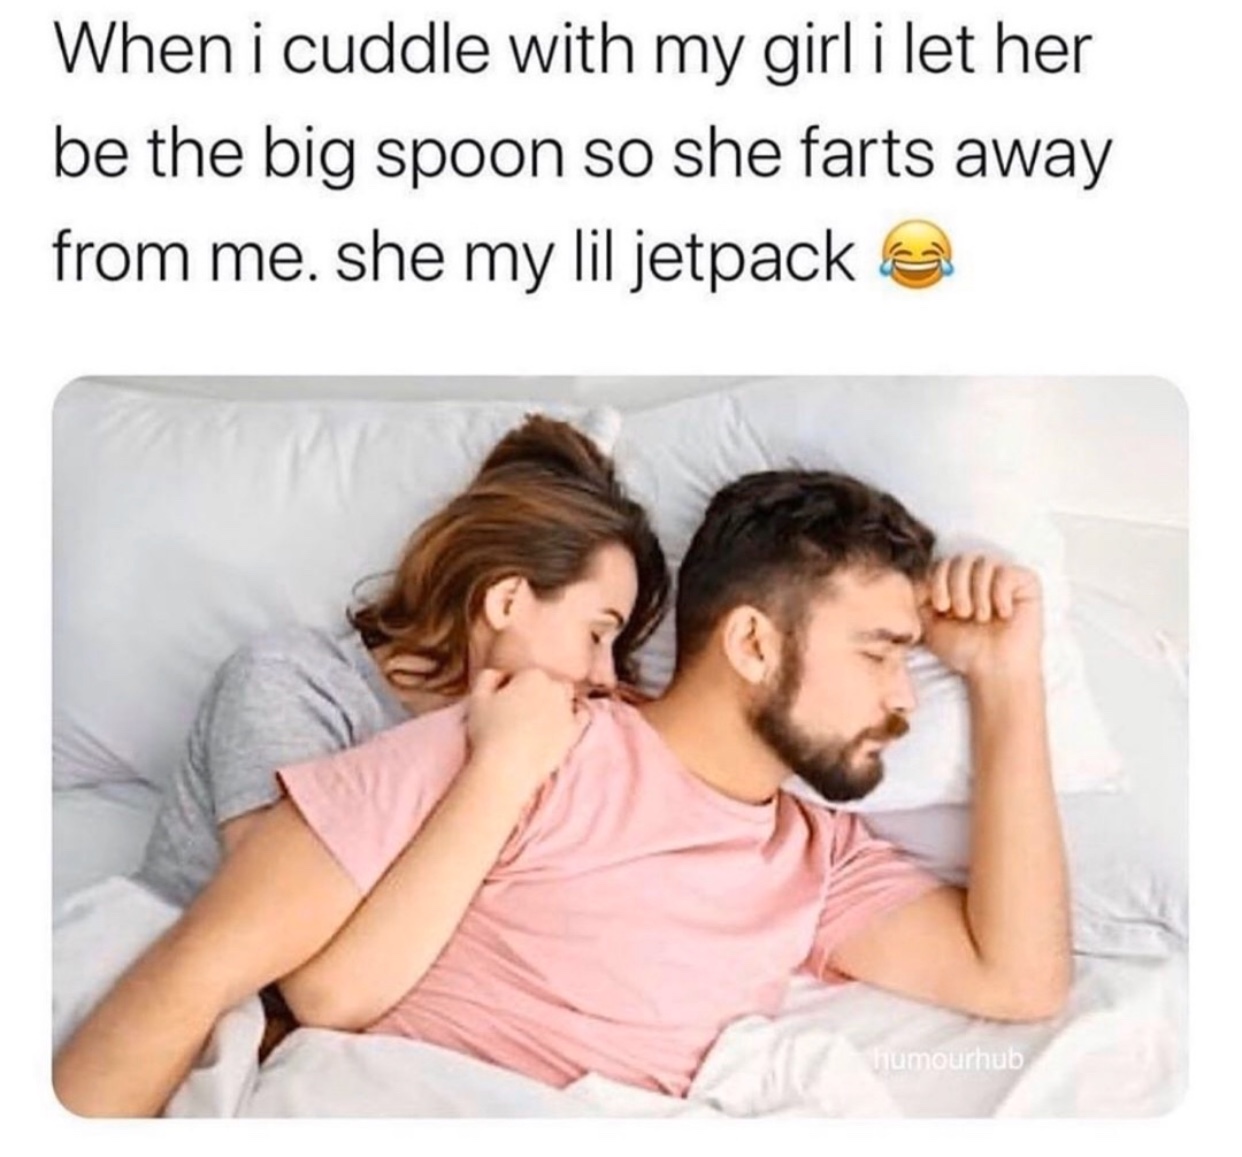 husband wife sleeping - When i cuddle with my girl i let her be the big spoon so she farts away from me. she my lil jetpack humourhub